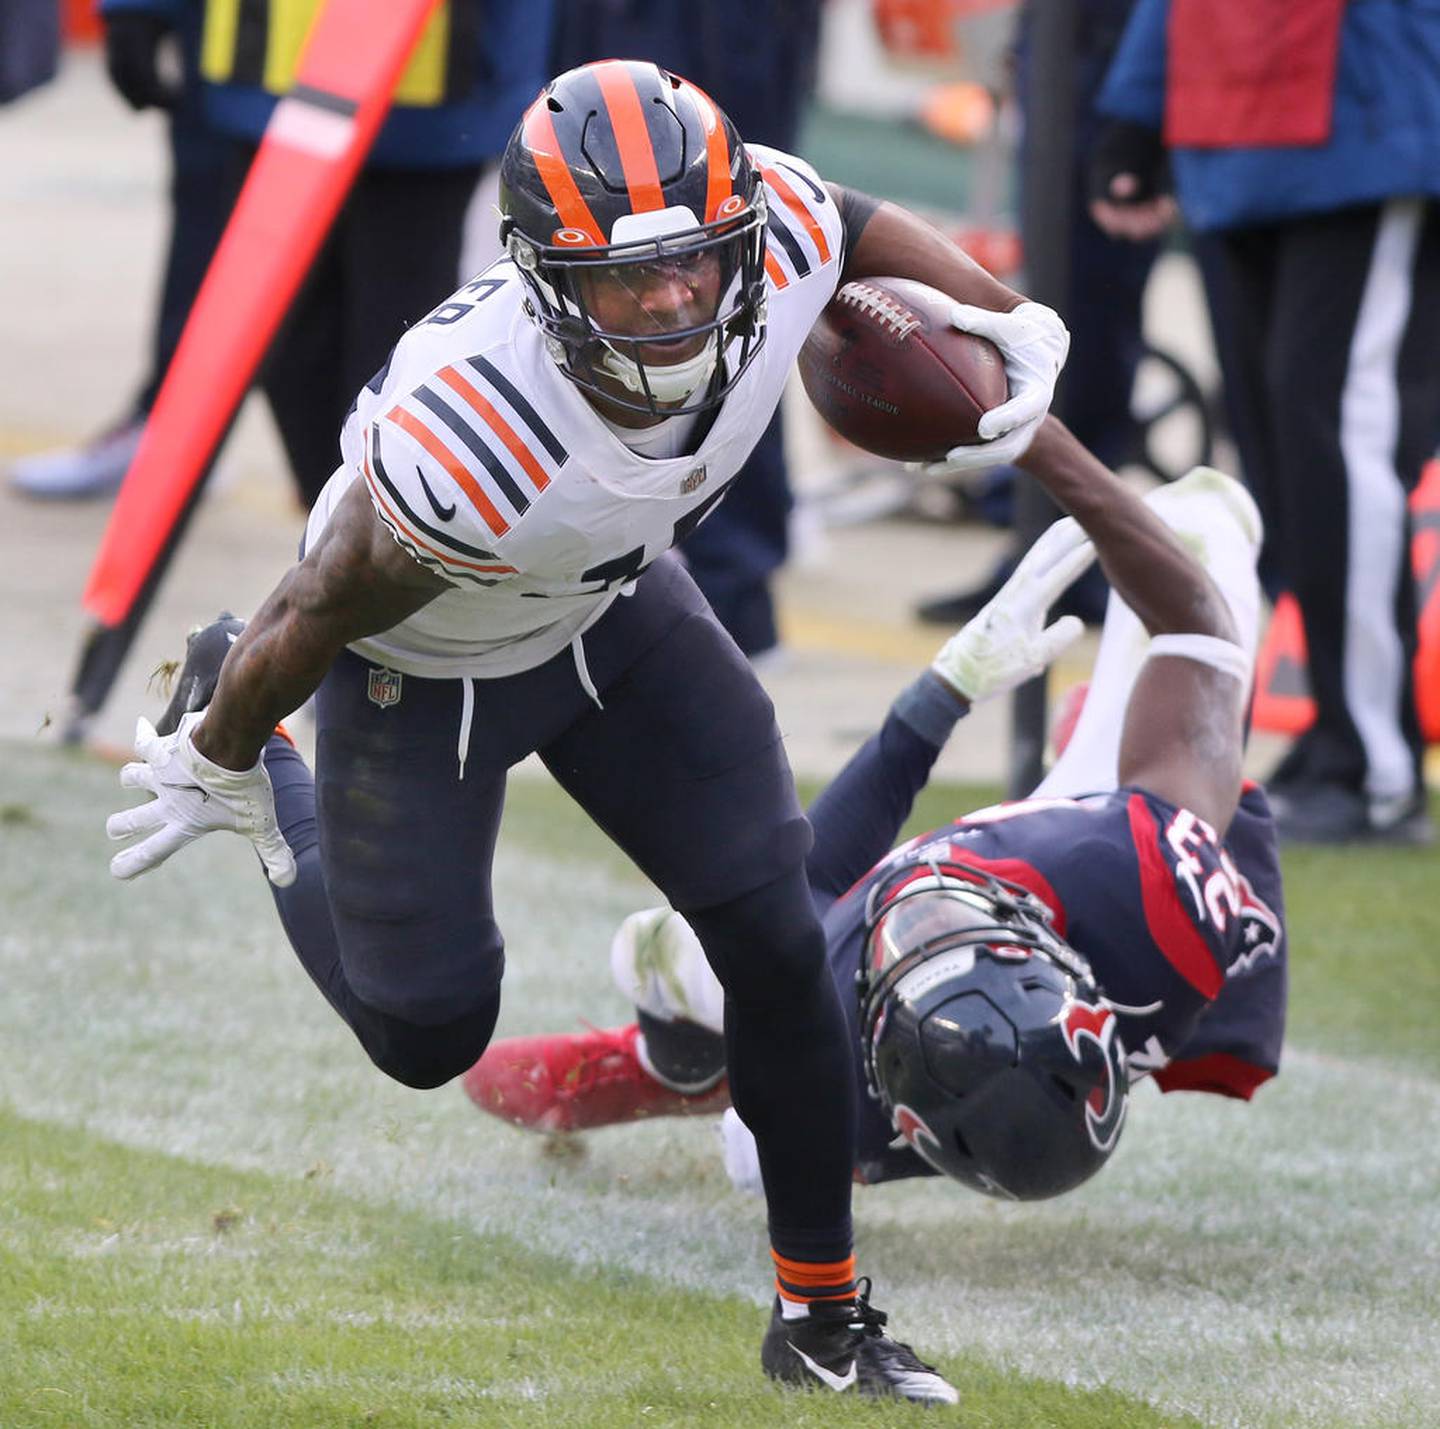 Chicago Bears wide receiver Anthony Miller (17) gets past Houston Texans free safety Eric Murray (23) after a catch during their game Sunday at Soldier Field in Chicago.